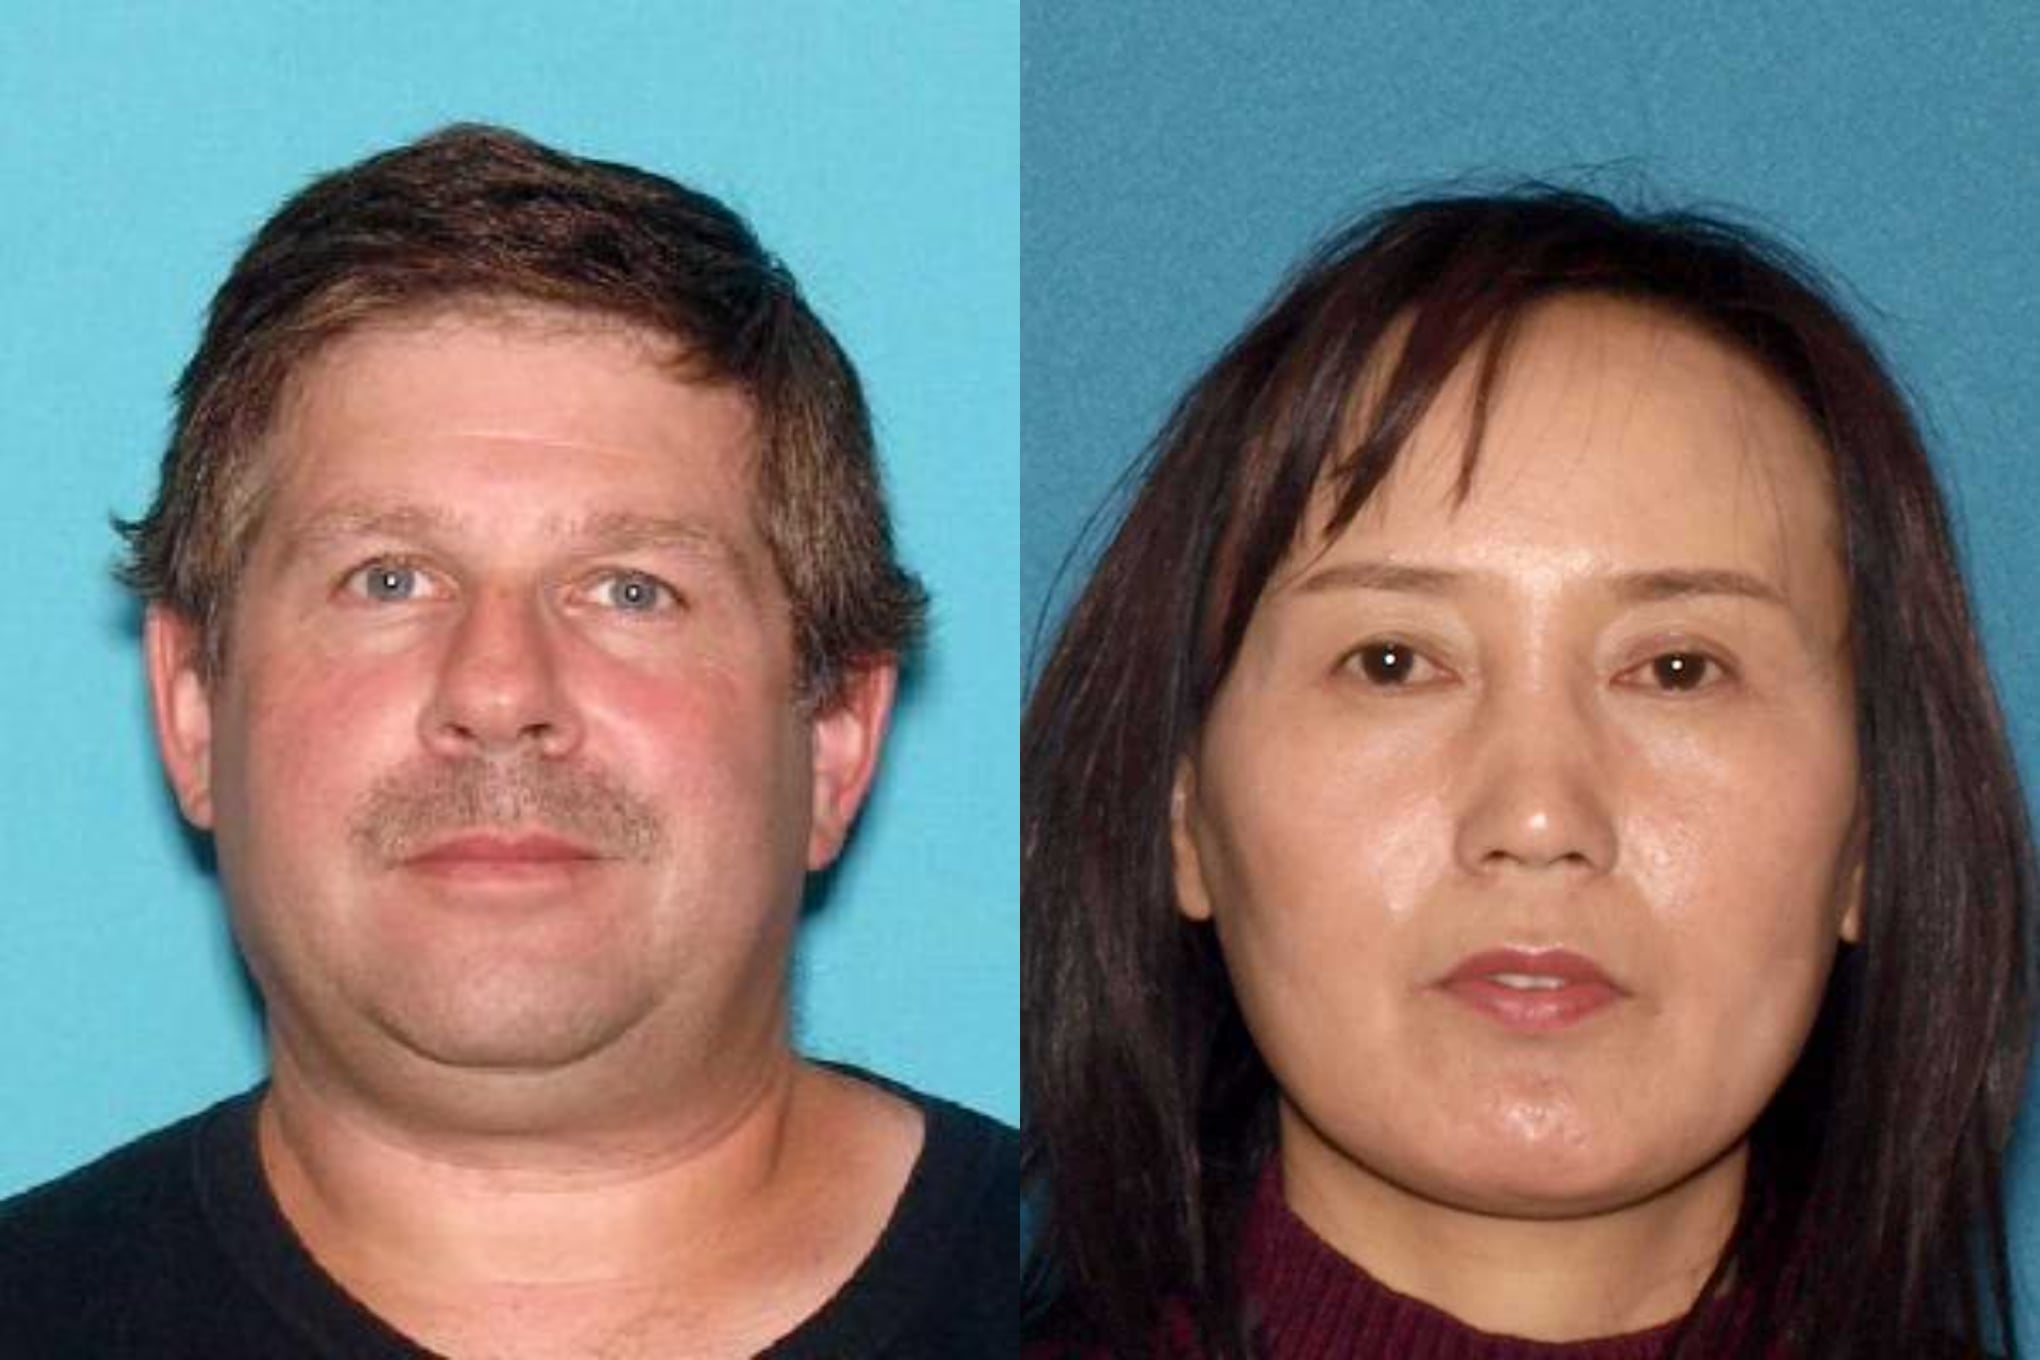 Wayne Lefkowitz, 56, of Toms River, and Guihua Cui, 51, also of Toms River. (Photos: OCPO)